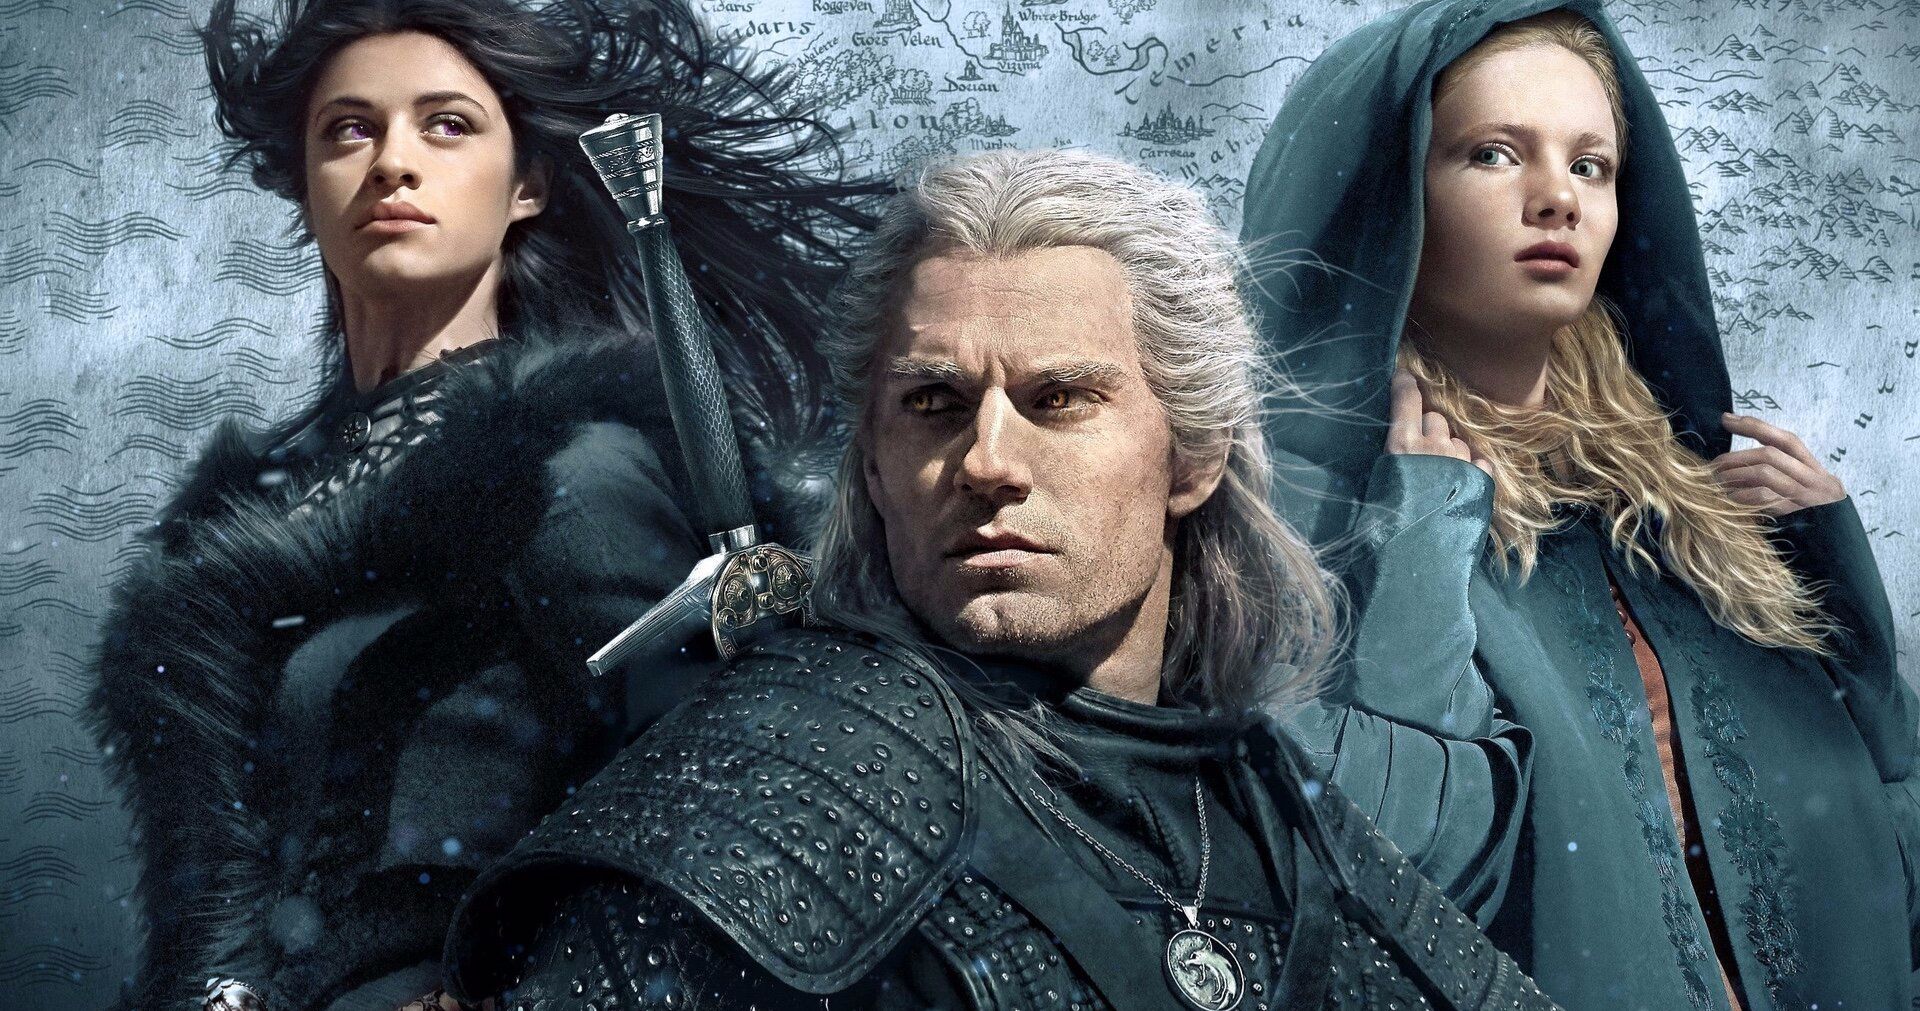 The Witcher Season 2 Cast Announced at Netflix